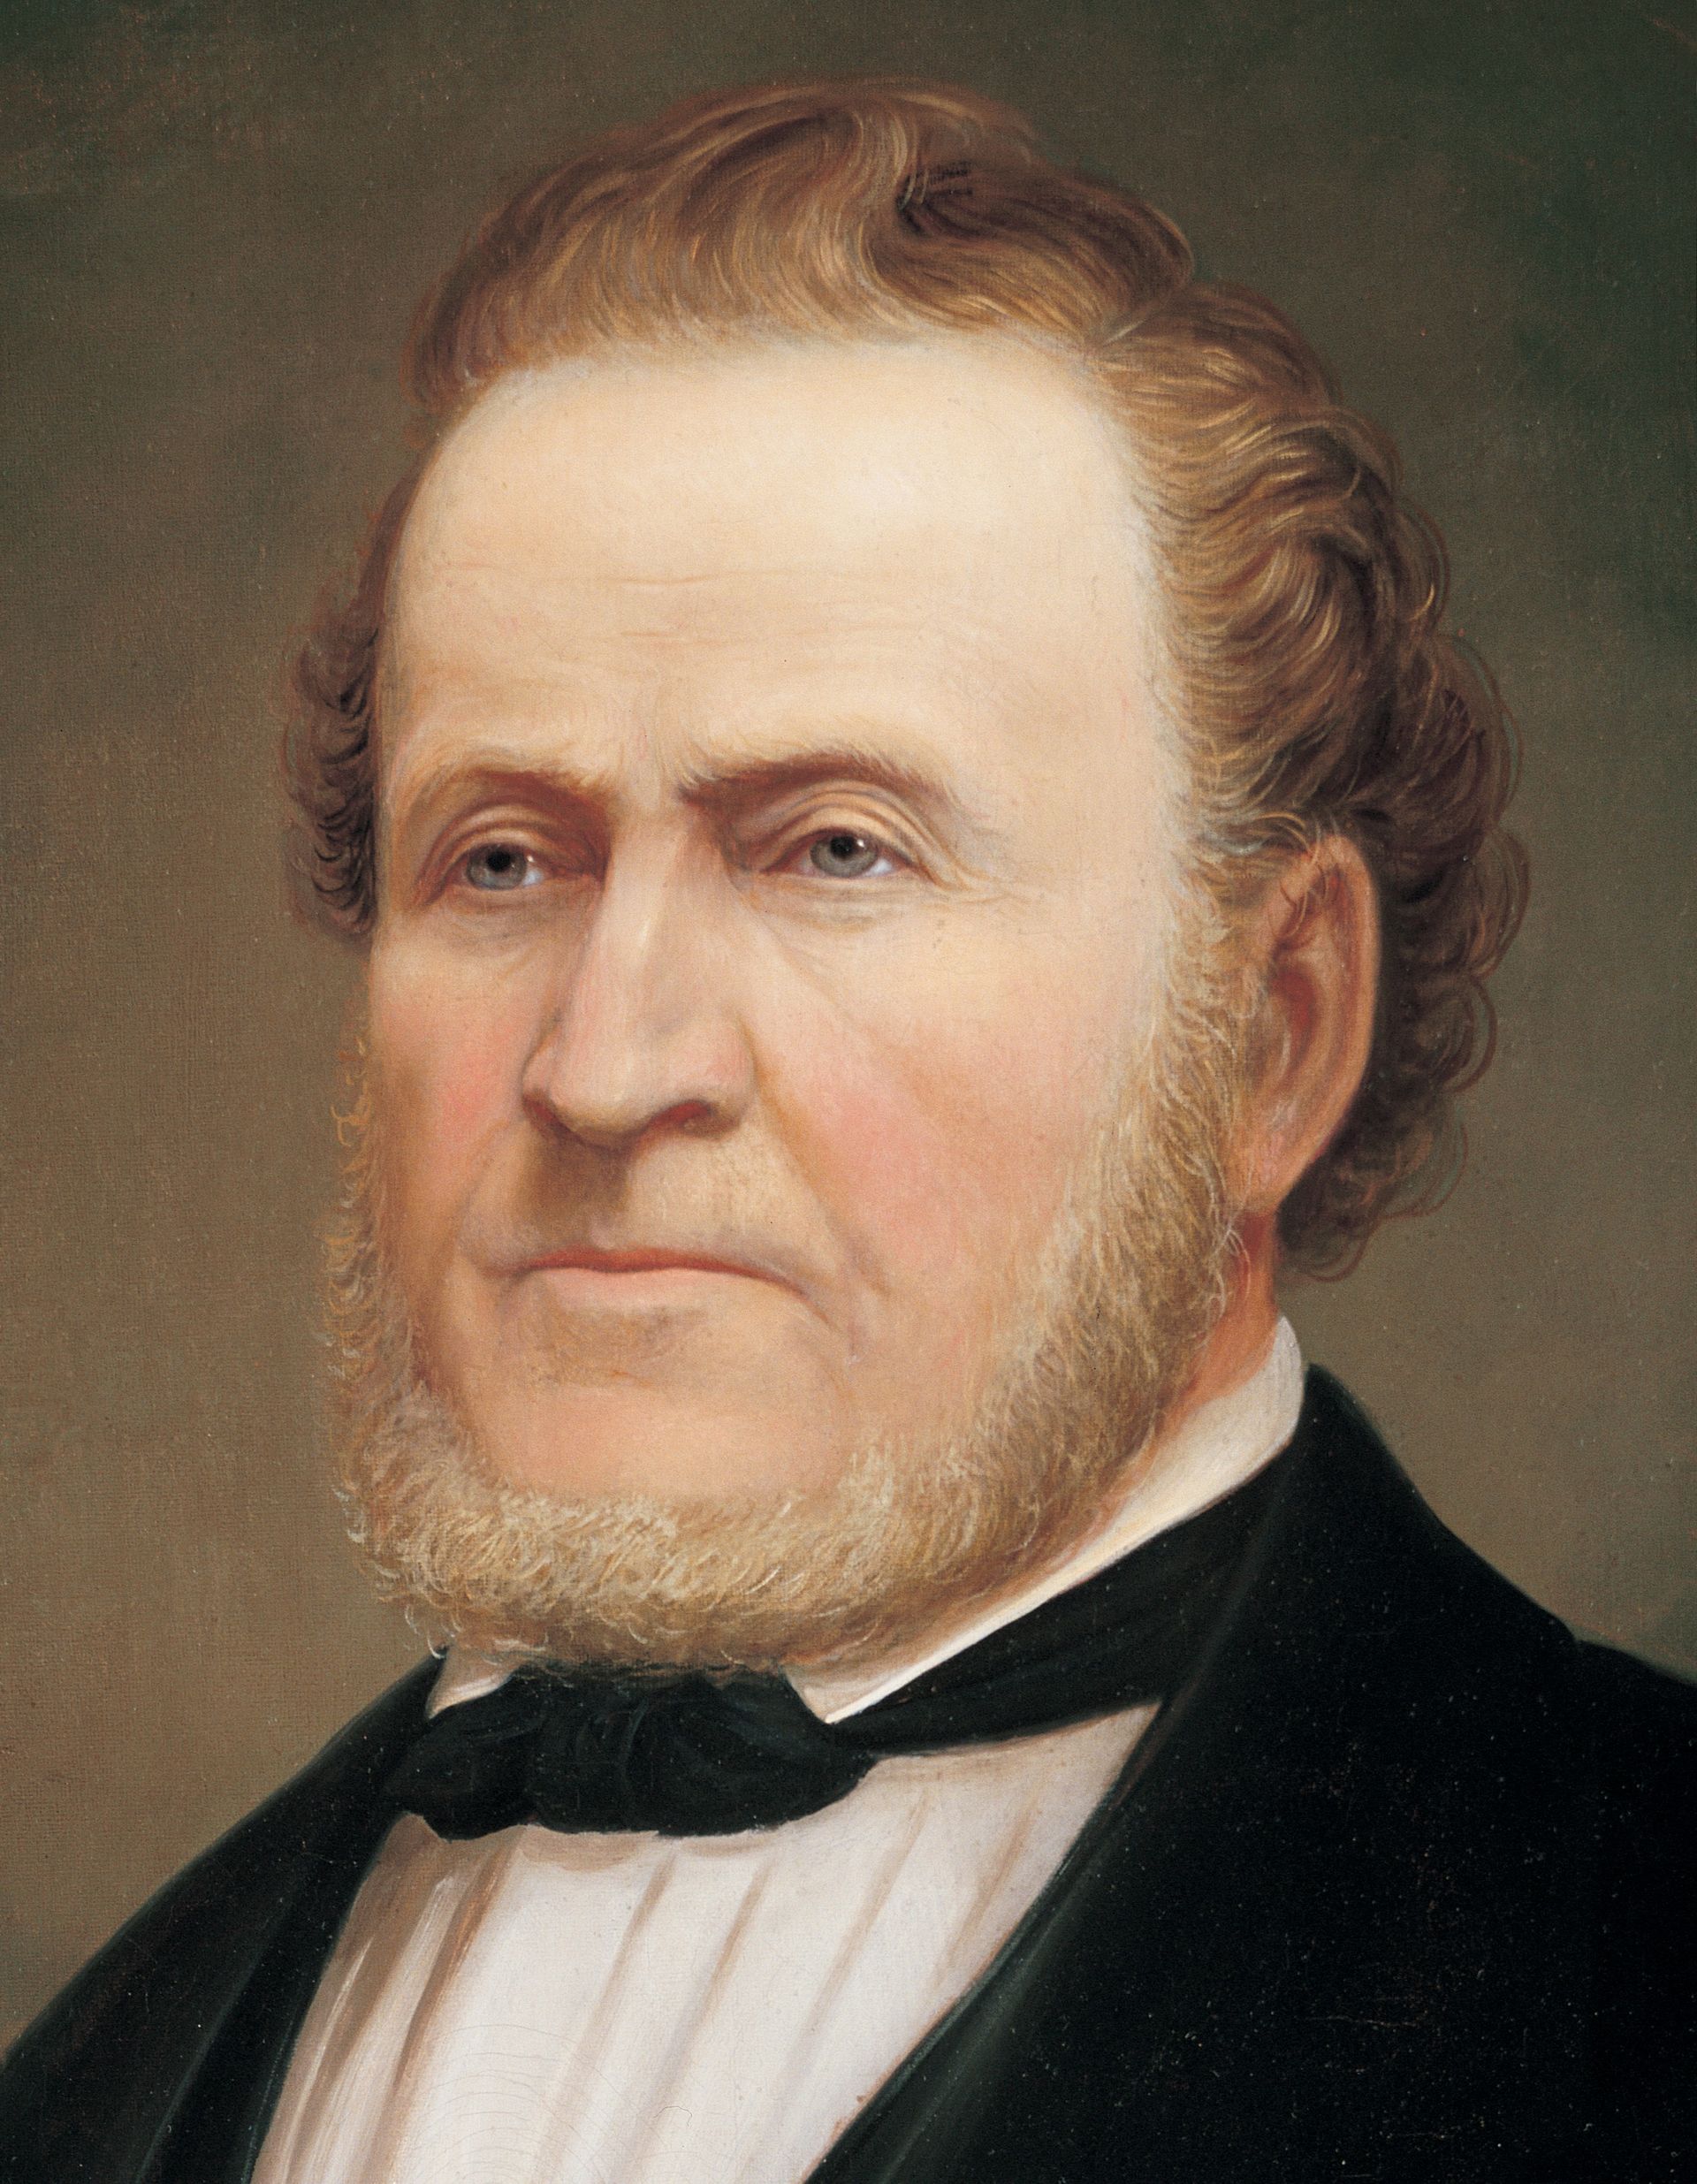 A portrait of Brigham Young, who served as the second President of the Church from 1847 to 1877; painted by George Martin Ottinger.